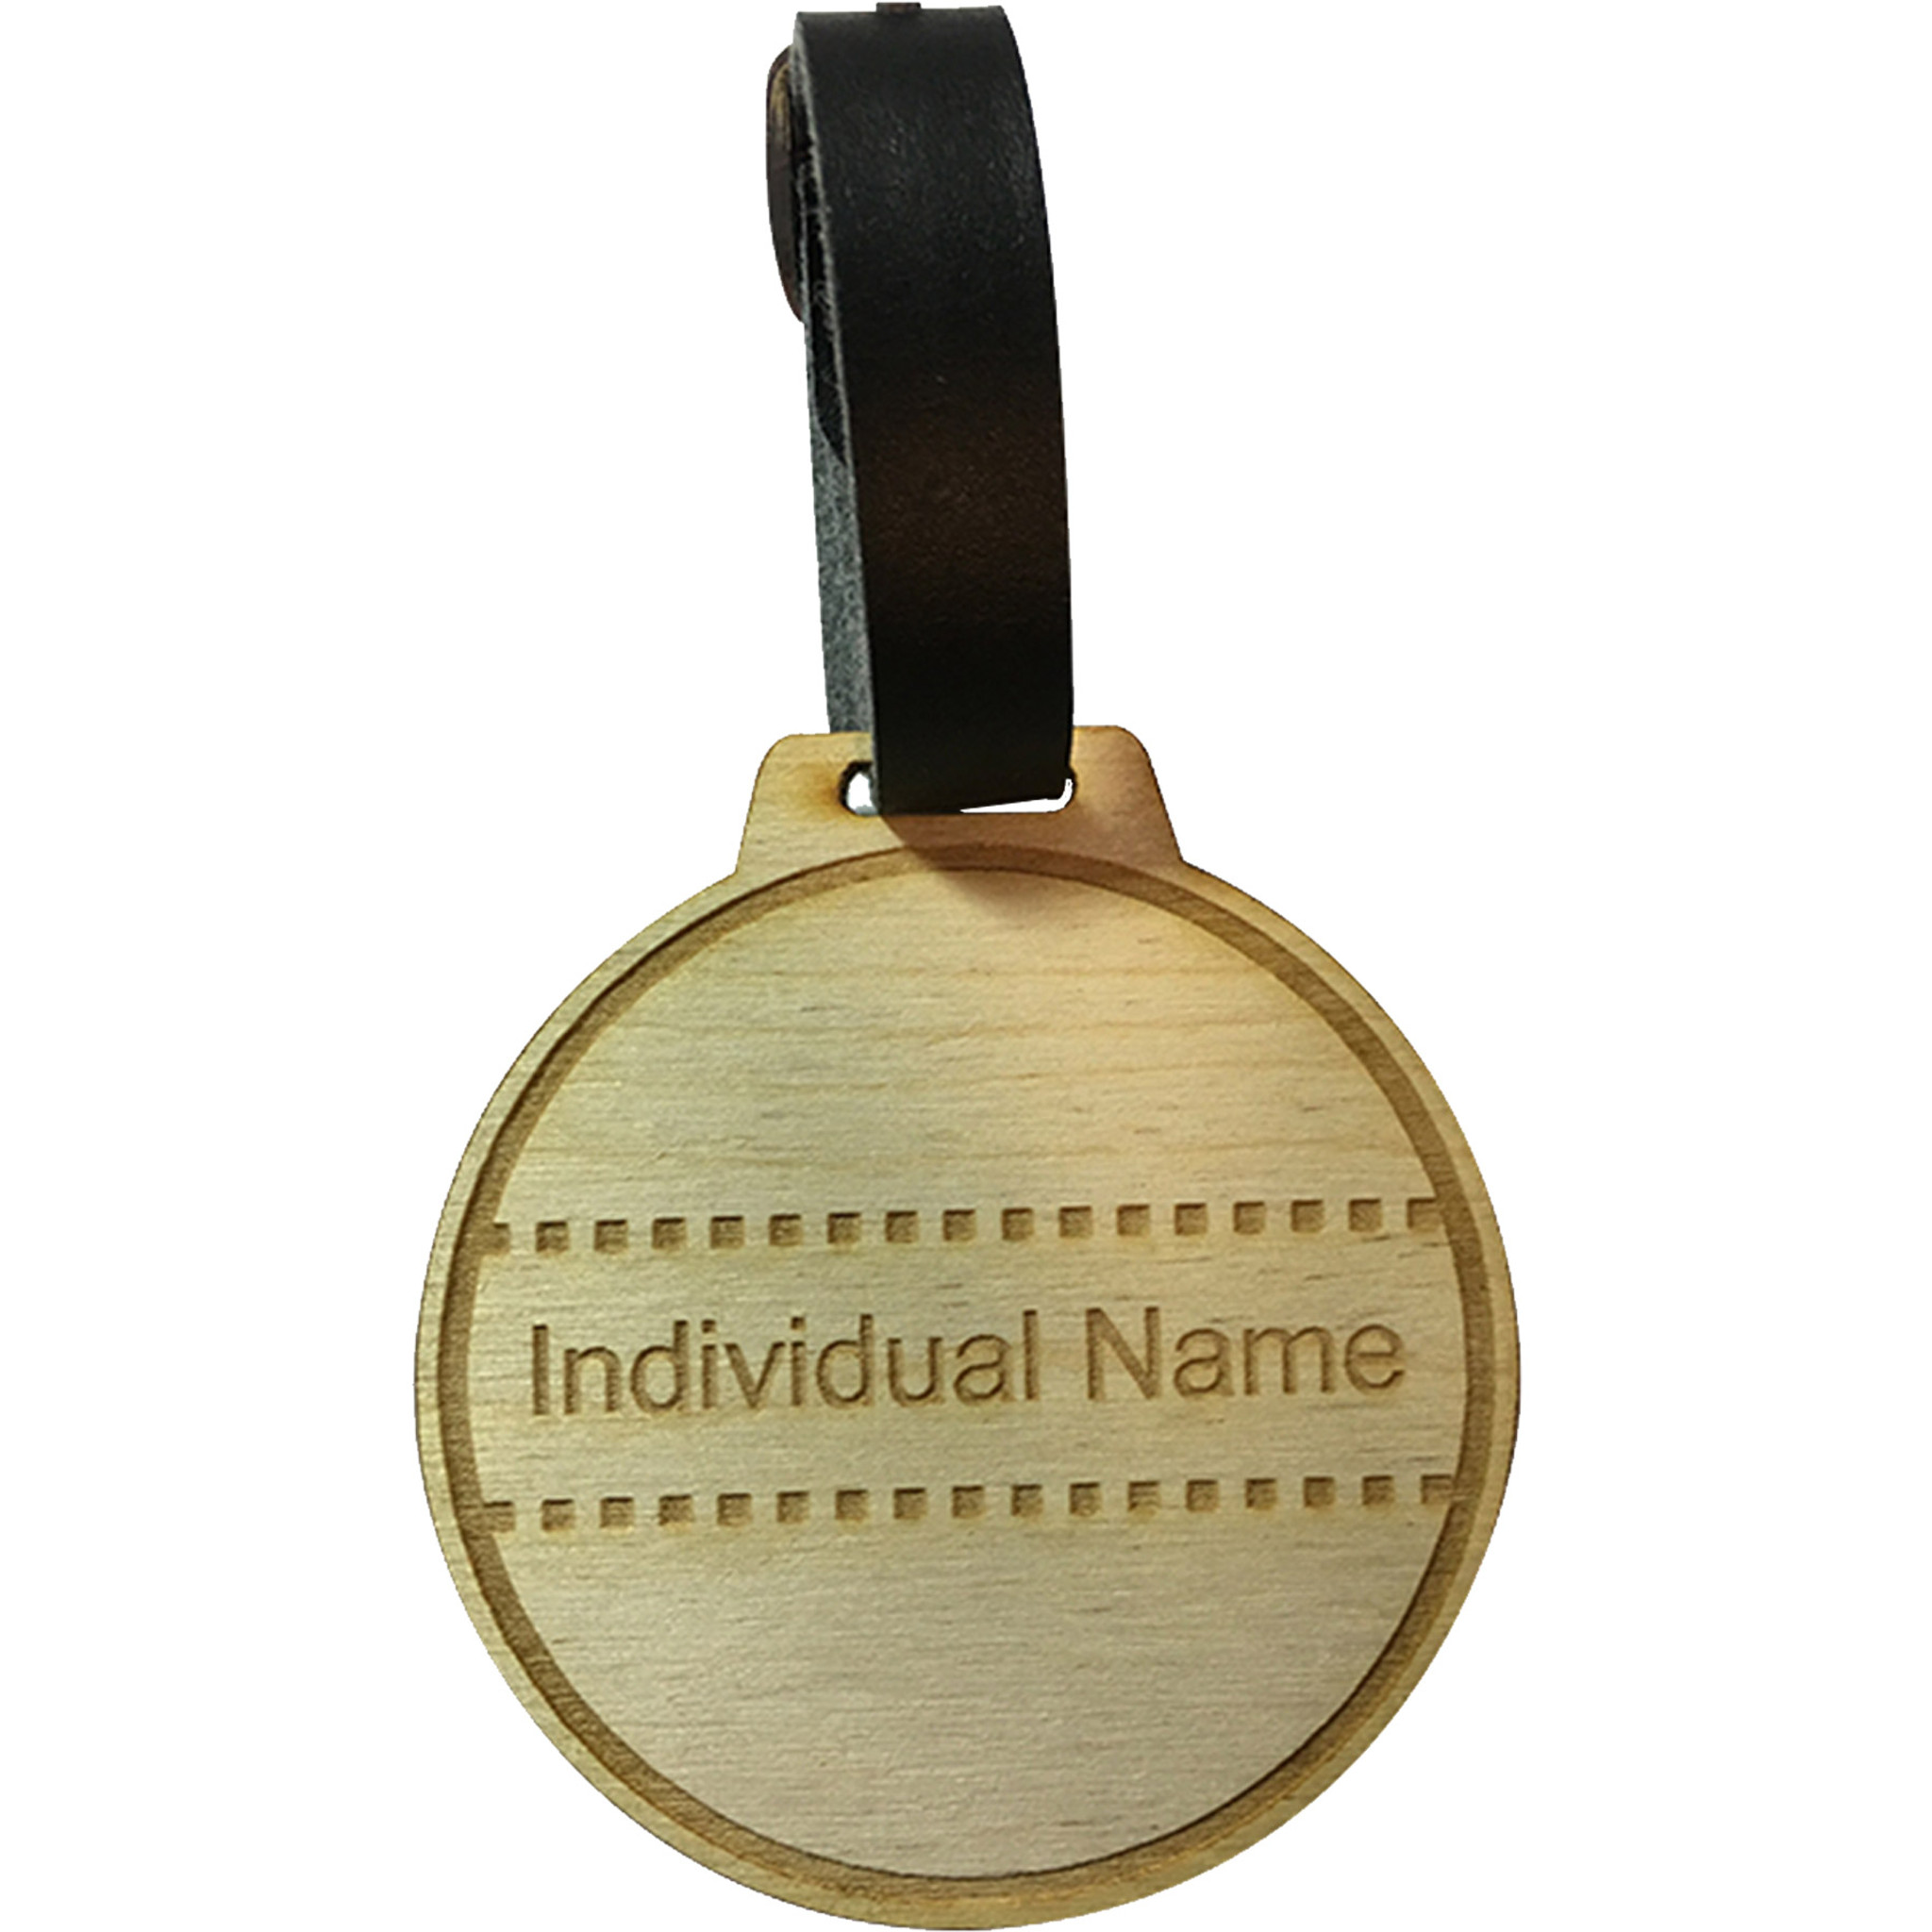 Wood Golf Bag Tags: 2" H x 2" W - HPG - Promotional Products Supplier